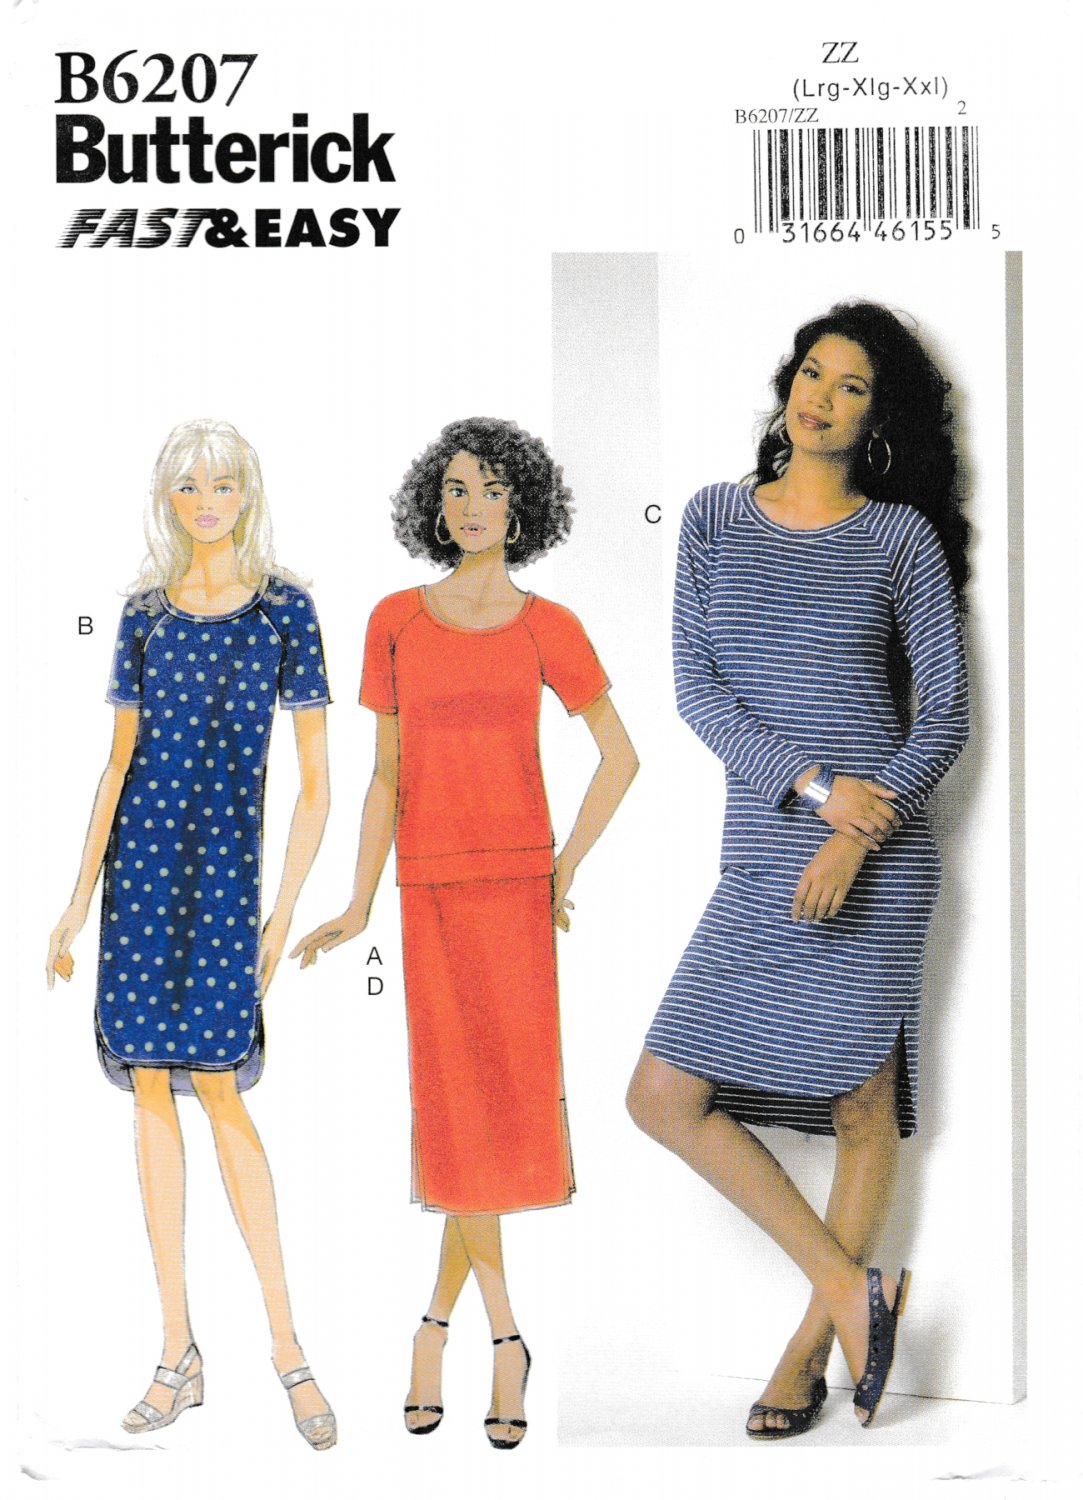 Butterick B6207 Misses Top Skirt Dress Varing Lengths Pullover Sewing Pattern Sizes Lrg-Xlg-Xxl